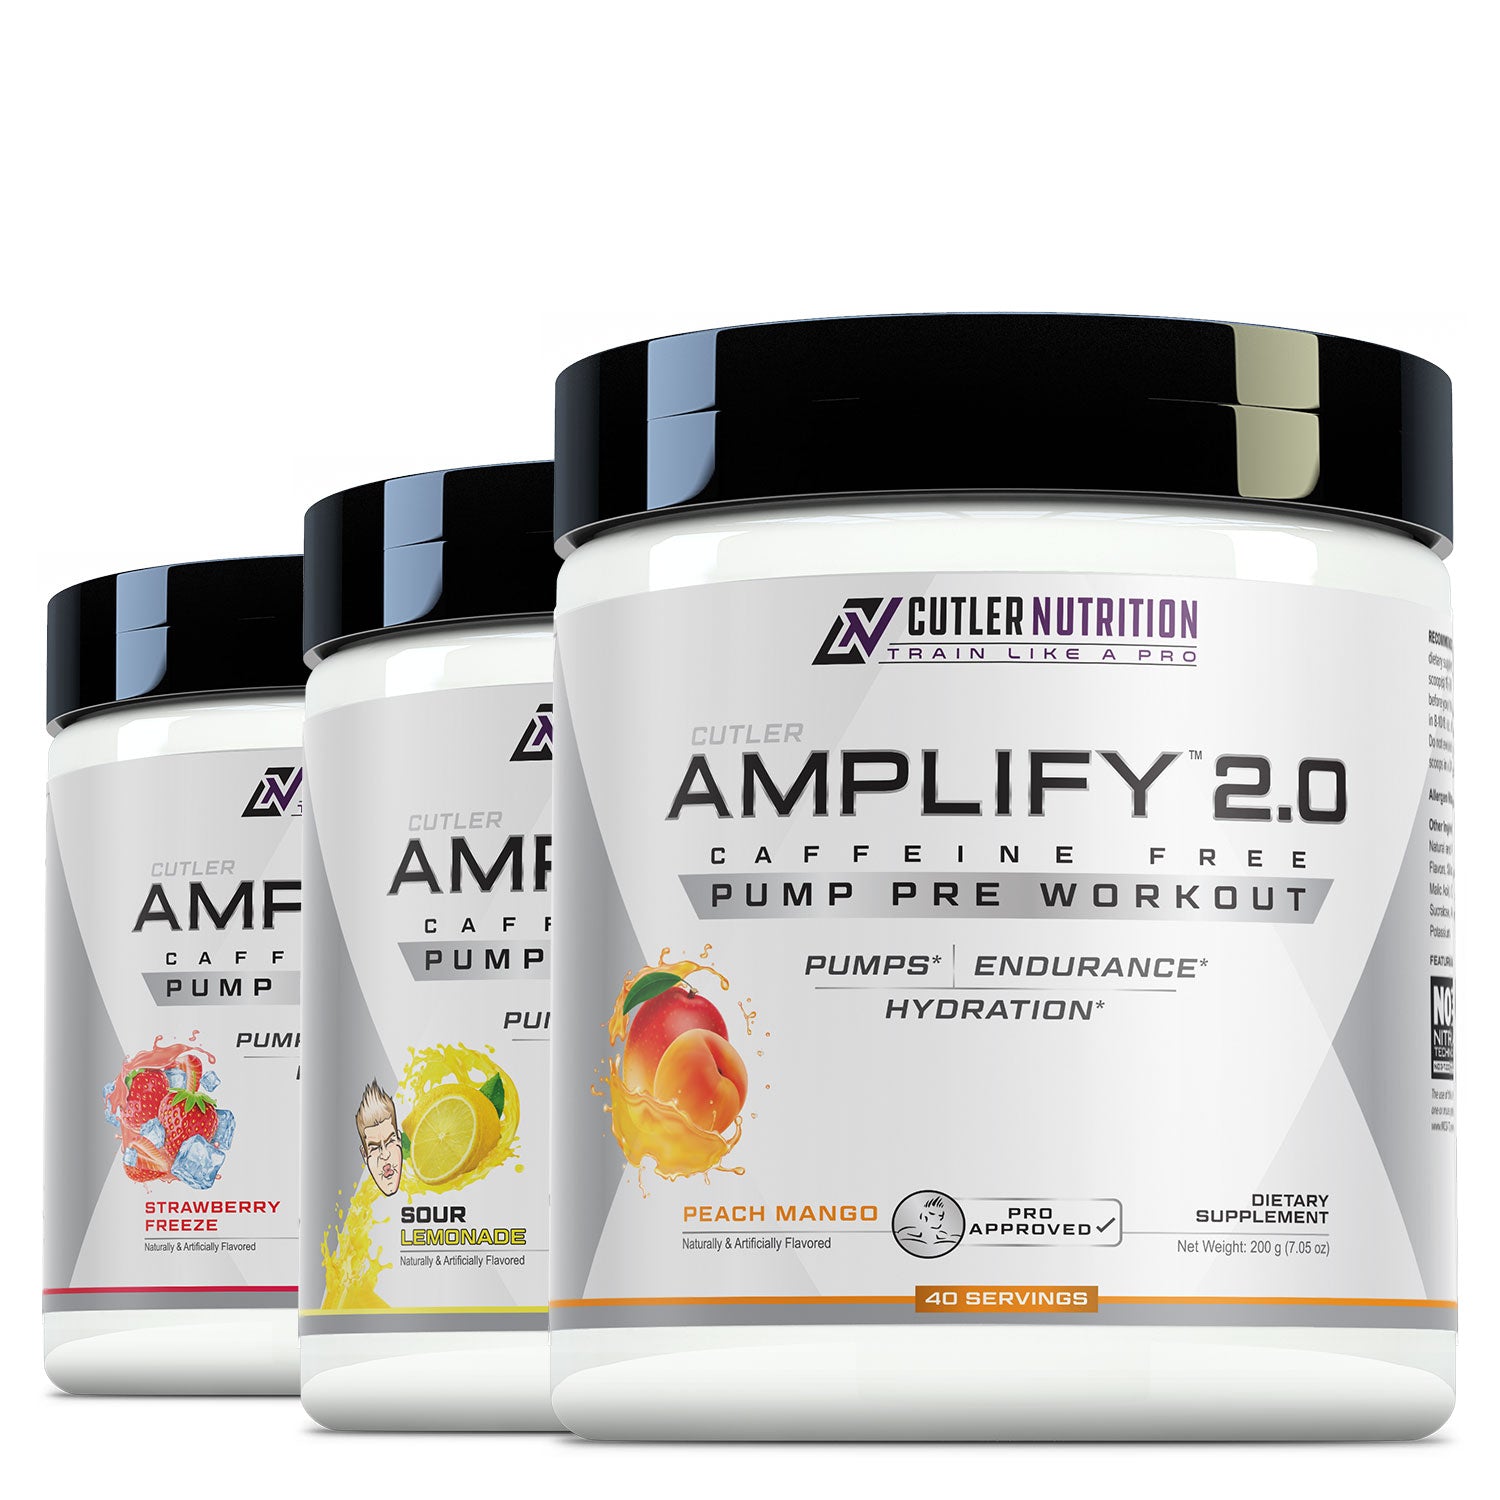  MEHTLERNHTRITIUN TRAIN LIKE A PRO AMFL!FY AMF CAFFE I F R EE . Va AMF PUMP F'RE WDRK AN NE CAF F PUMP i P HYDRATION* PUMI PUMPS*! ENDURANCE" ey 20 ouT N i DIETARY STRAWBERRY PEACH MANGO PRO SUPPLEMENT FREEZE e APPROVED Tanaal vticaly Flavored Naturaly Arfcilly Flavored 2 Net Weight: 200 7.05 0z 